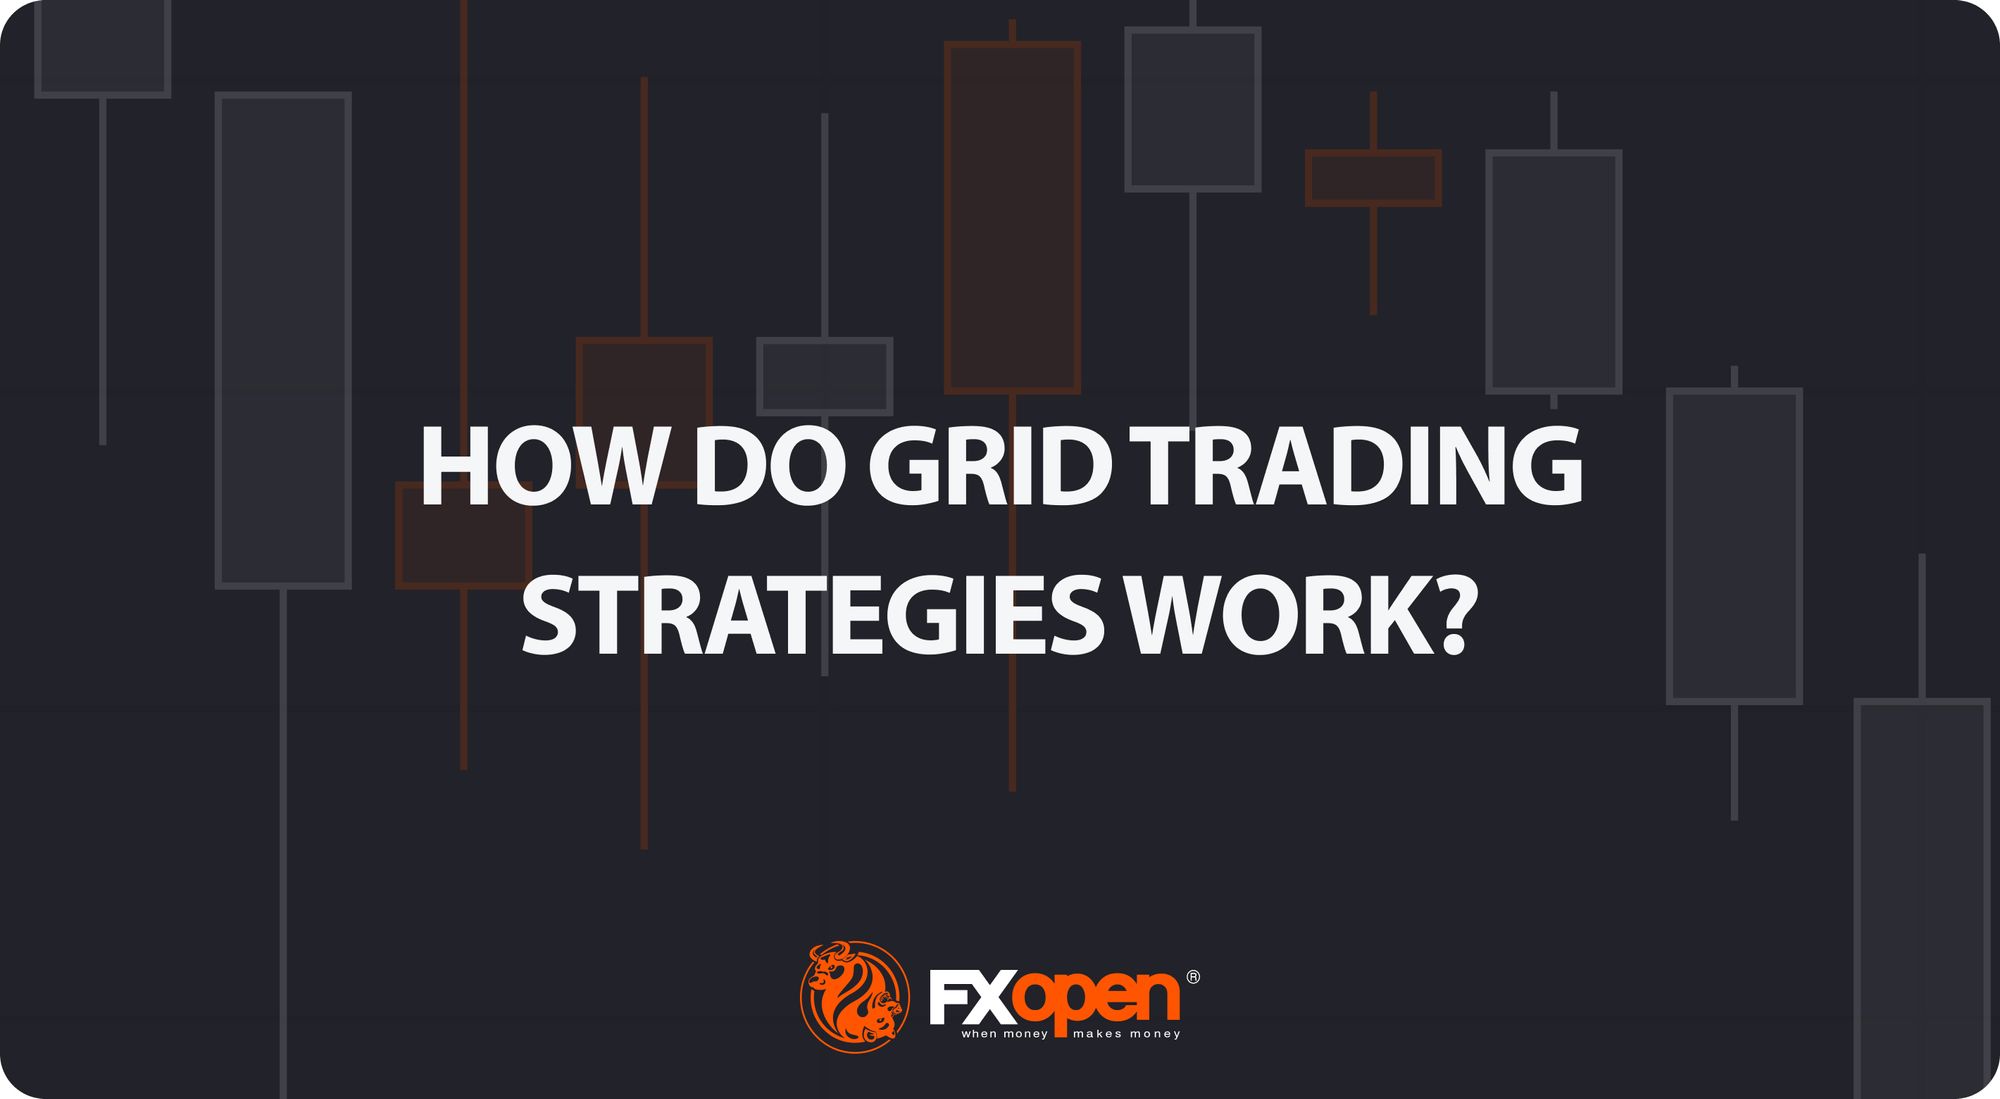 How Do Grid Trading Strategies Work?